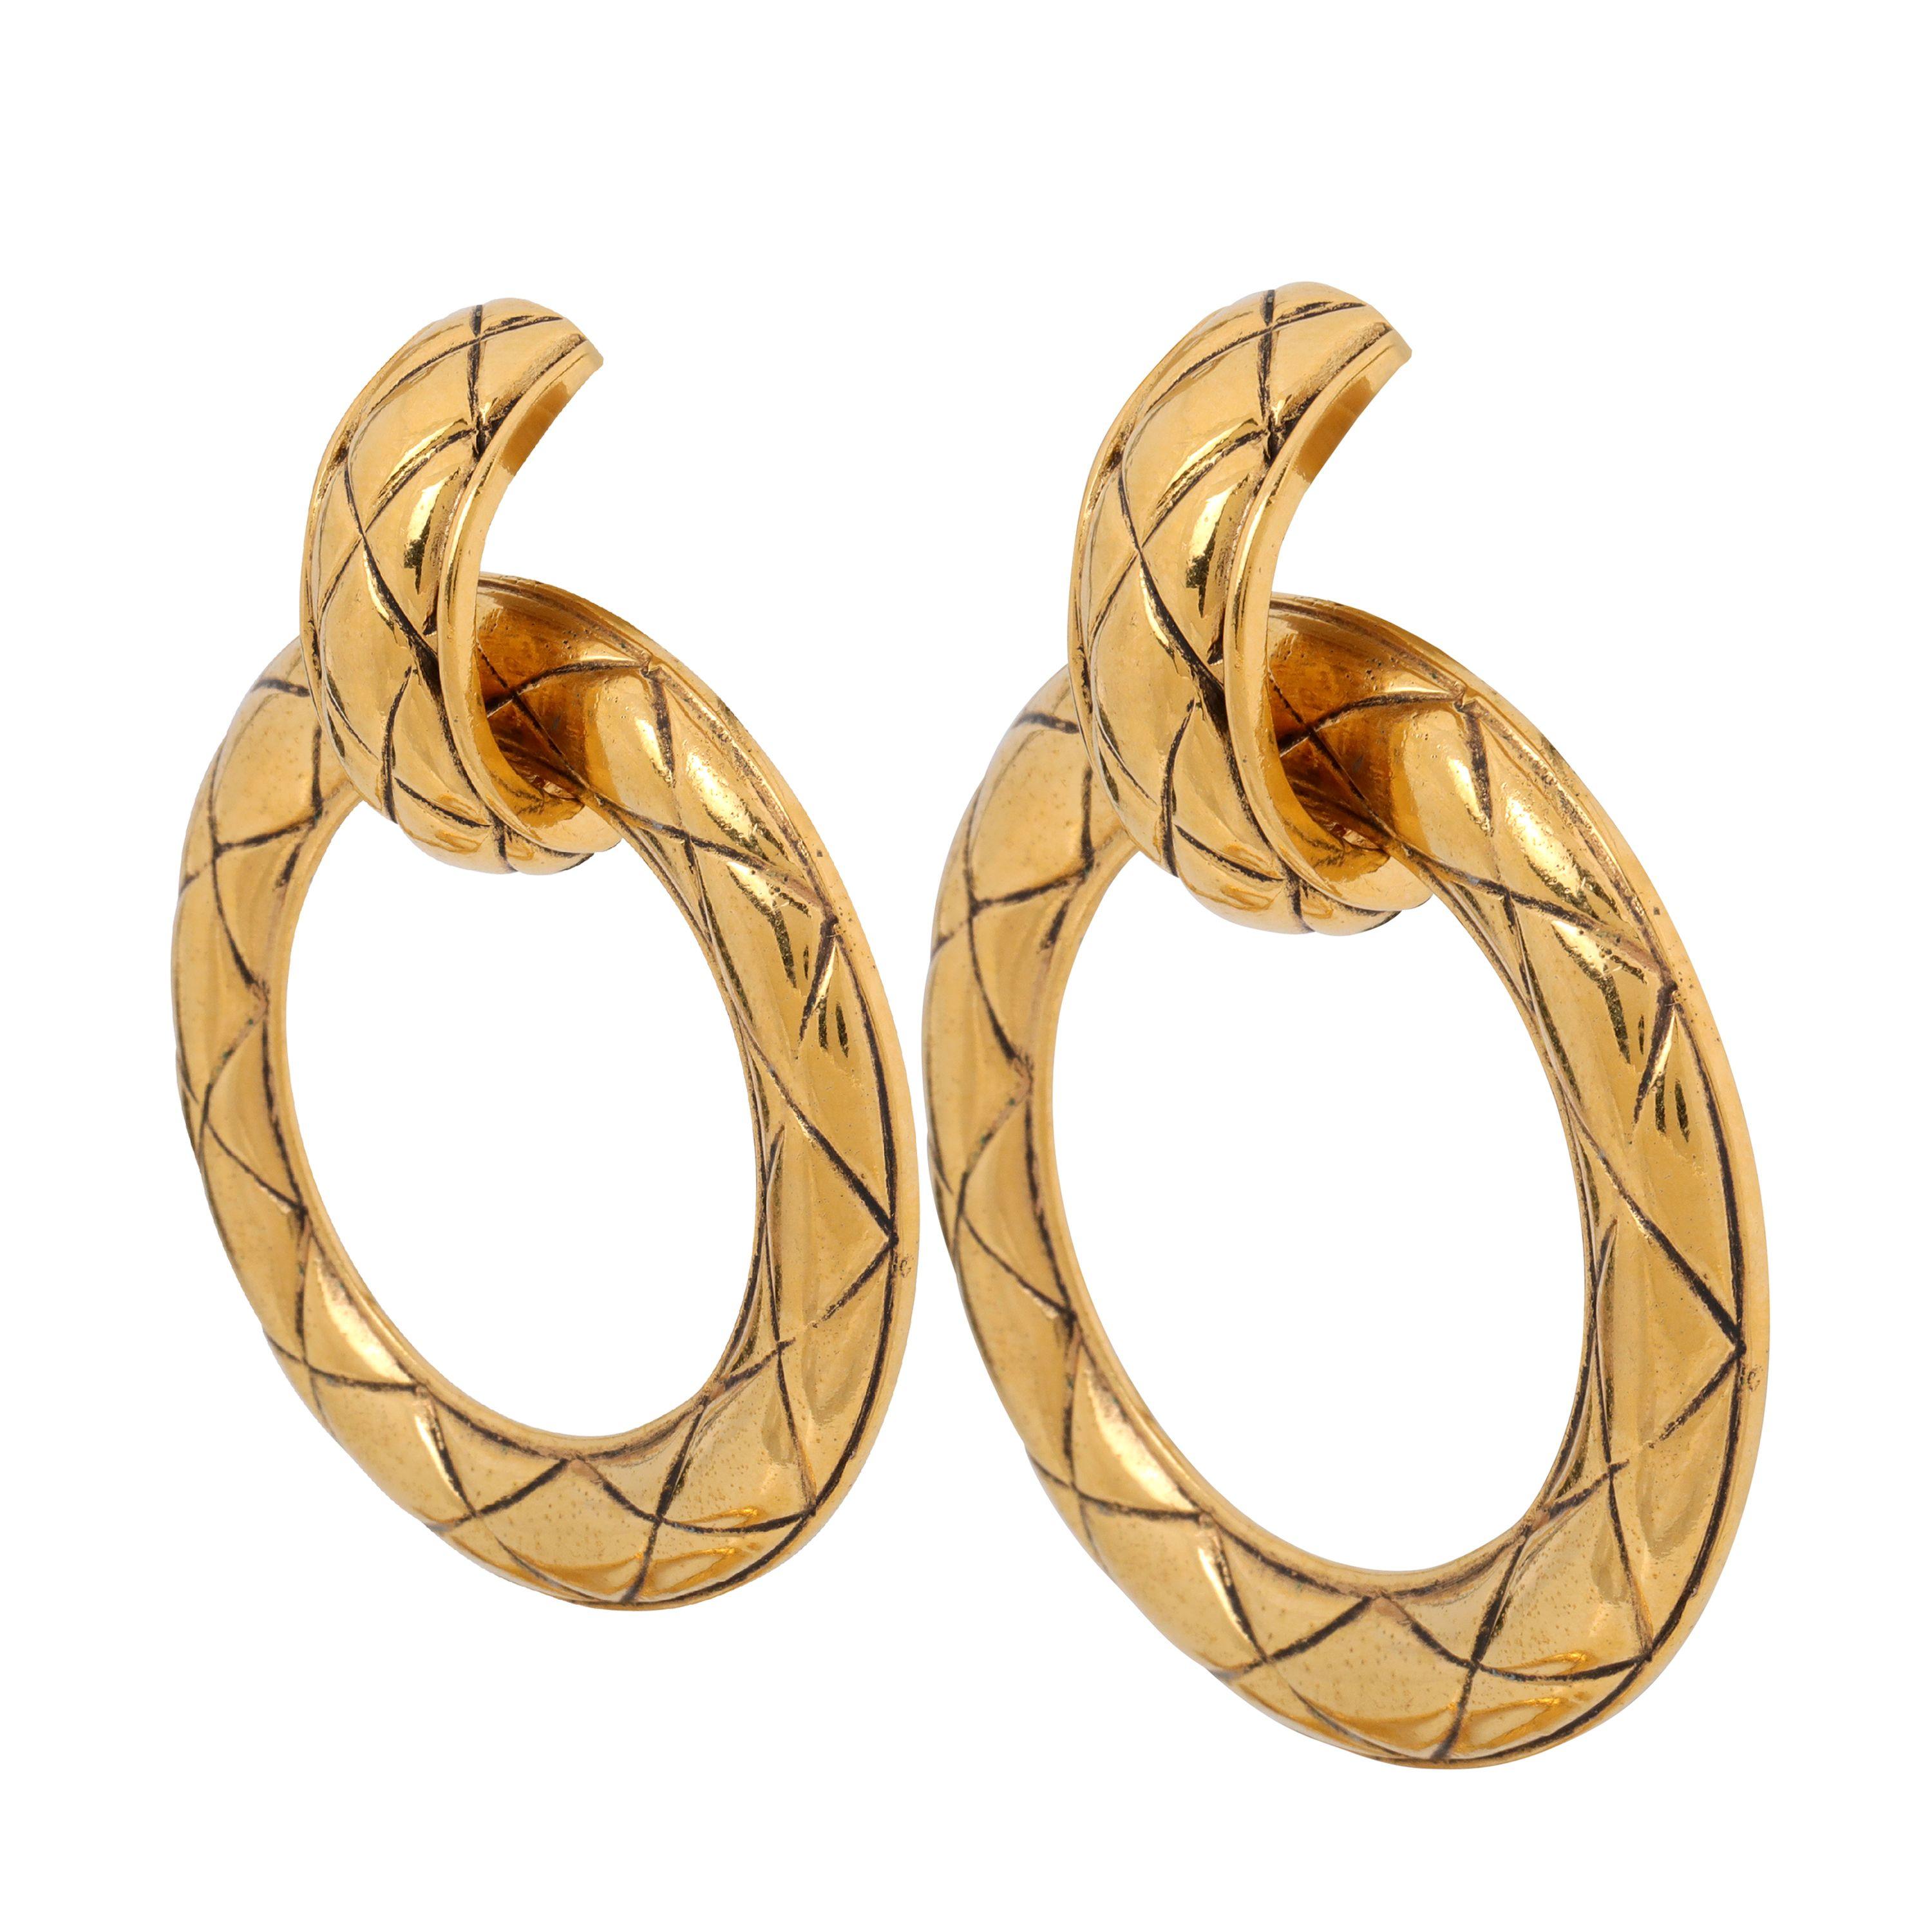 These authentic Chanel Gold Quilted Hoop Clip On Earrings are in excellent vintage condition from the 1980’s.  Large front facing gold hoops are etched with signature Chanel quilting.  Clip on style.  Made in France. Pouch or box included.  

PBF